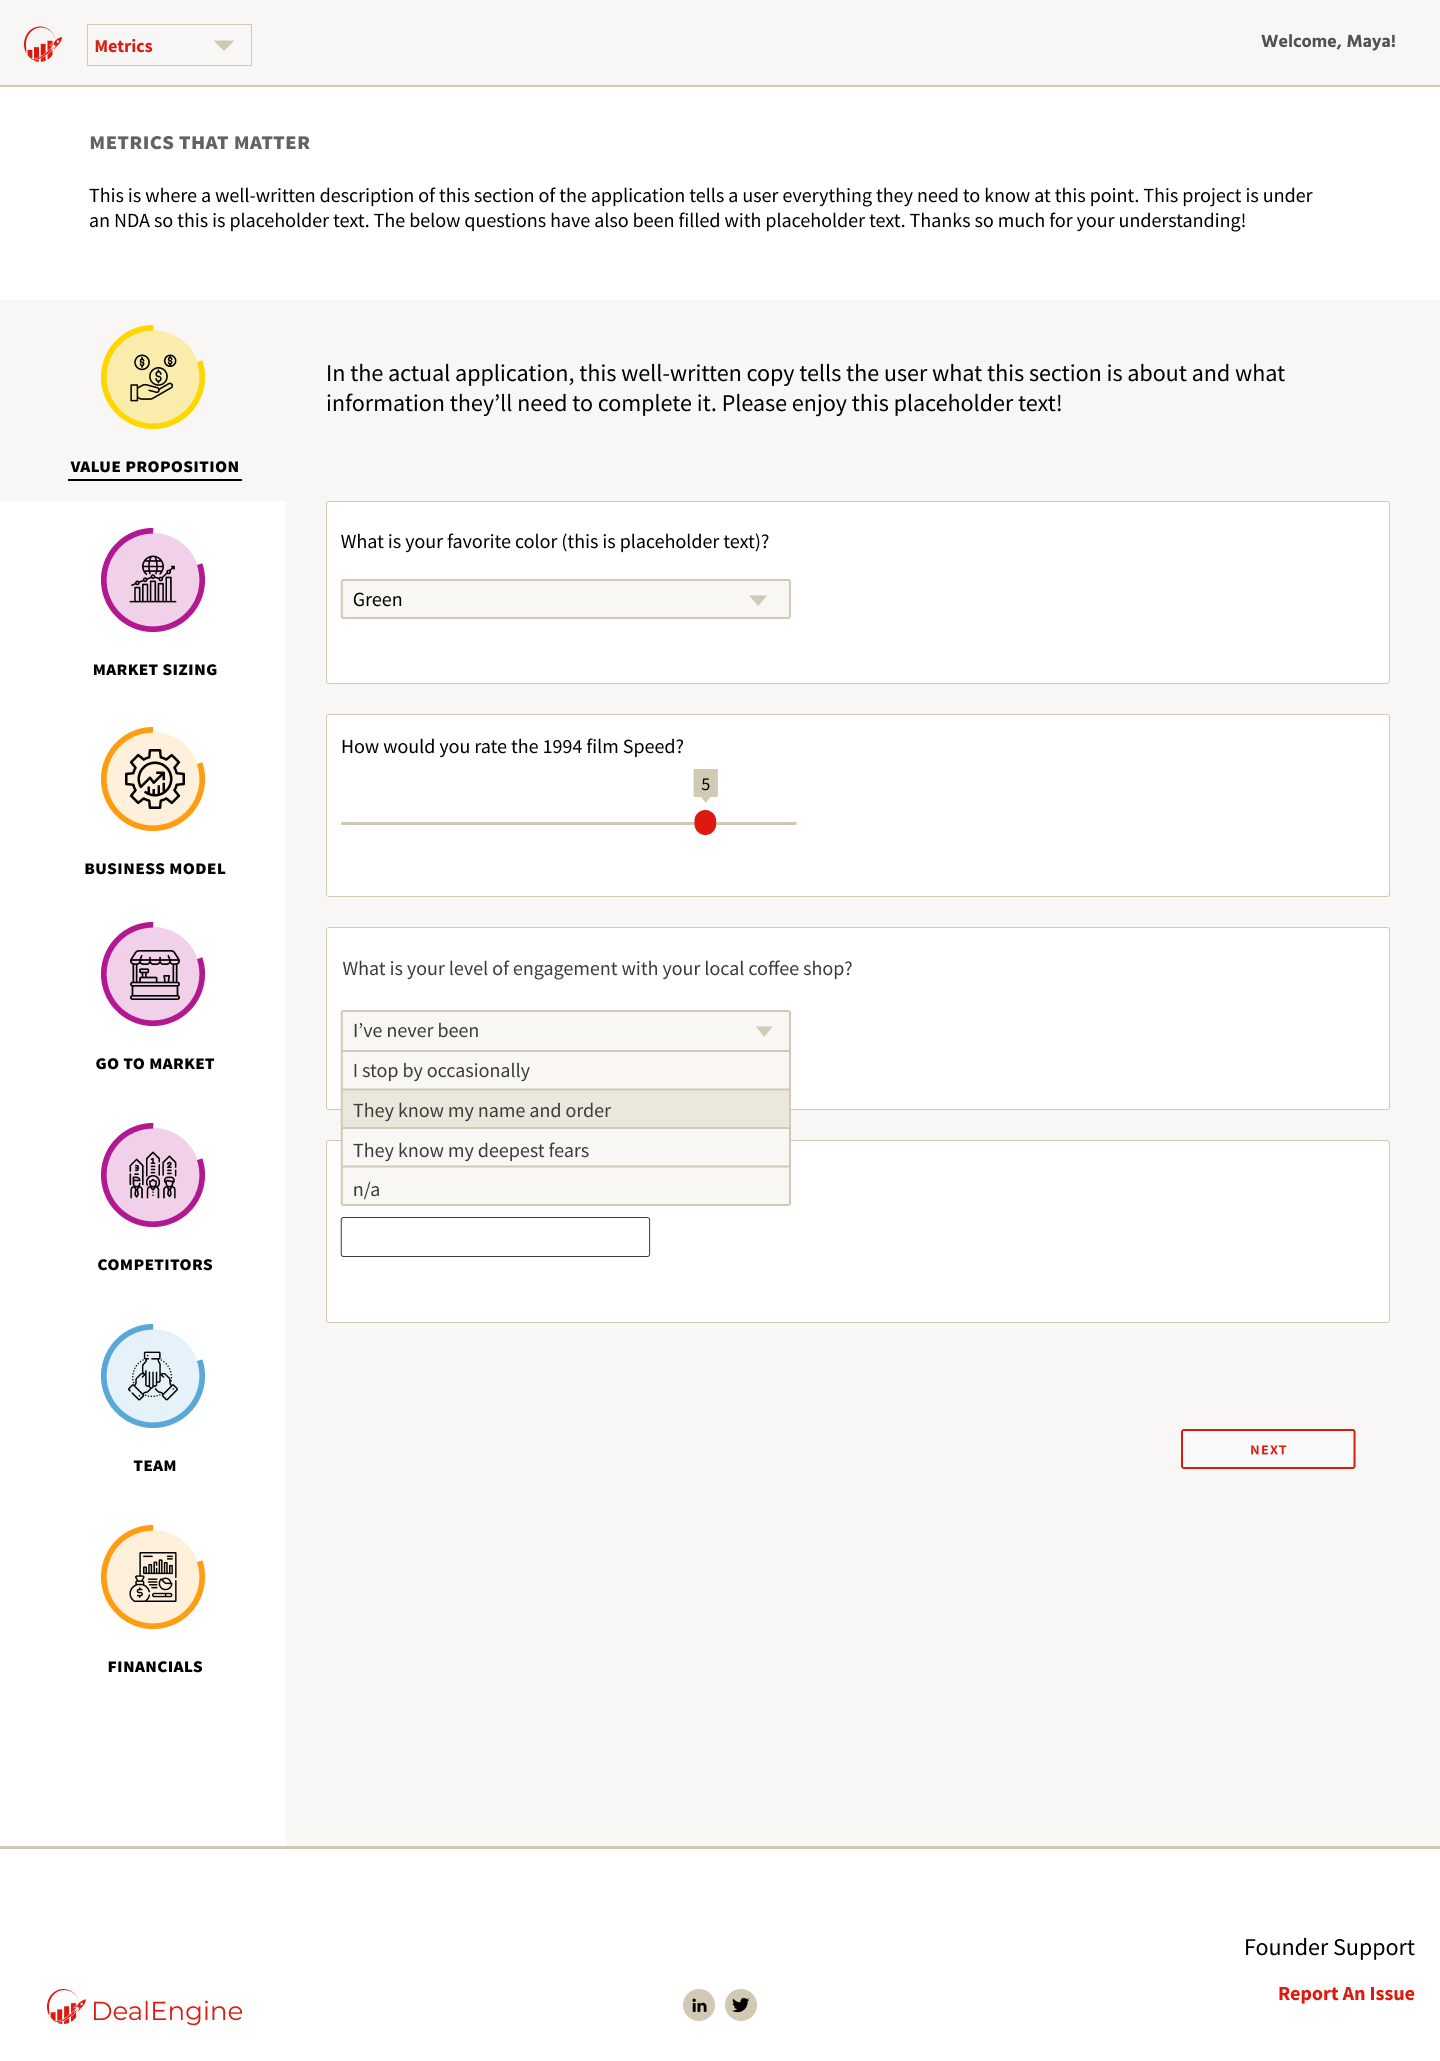 Mockup of survey interface showing circular icons with radial progess bars for each section on the left and questions on the right.